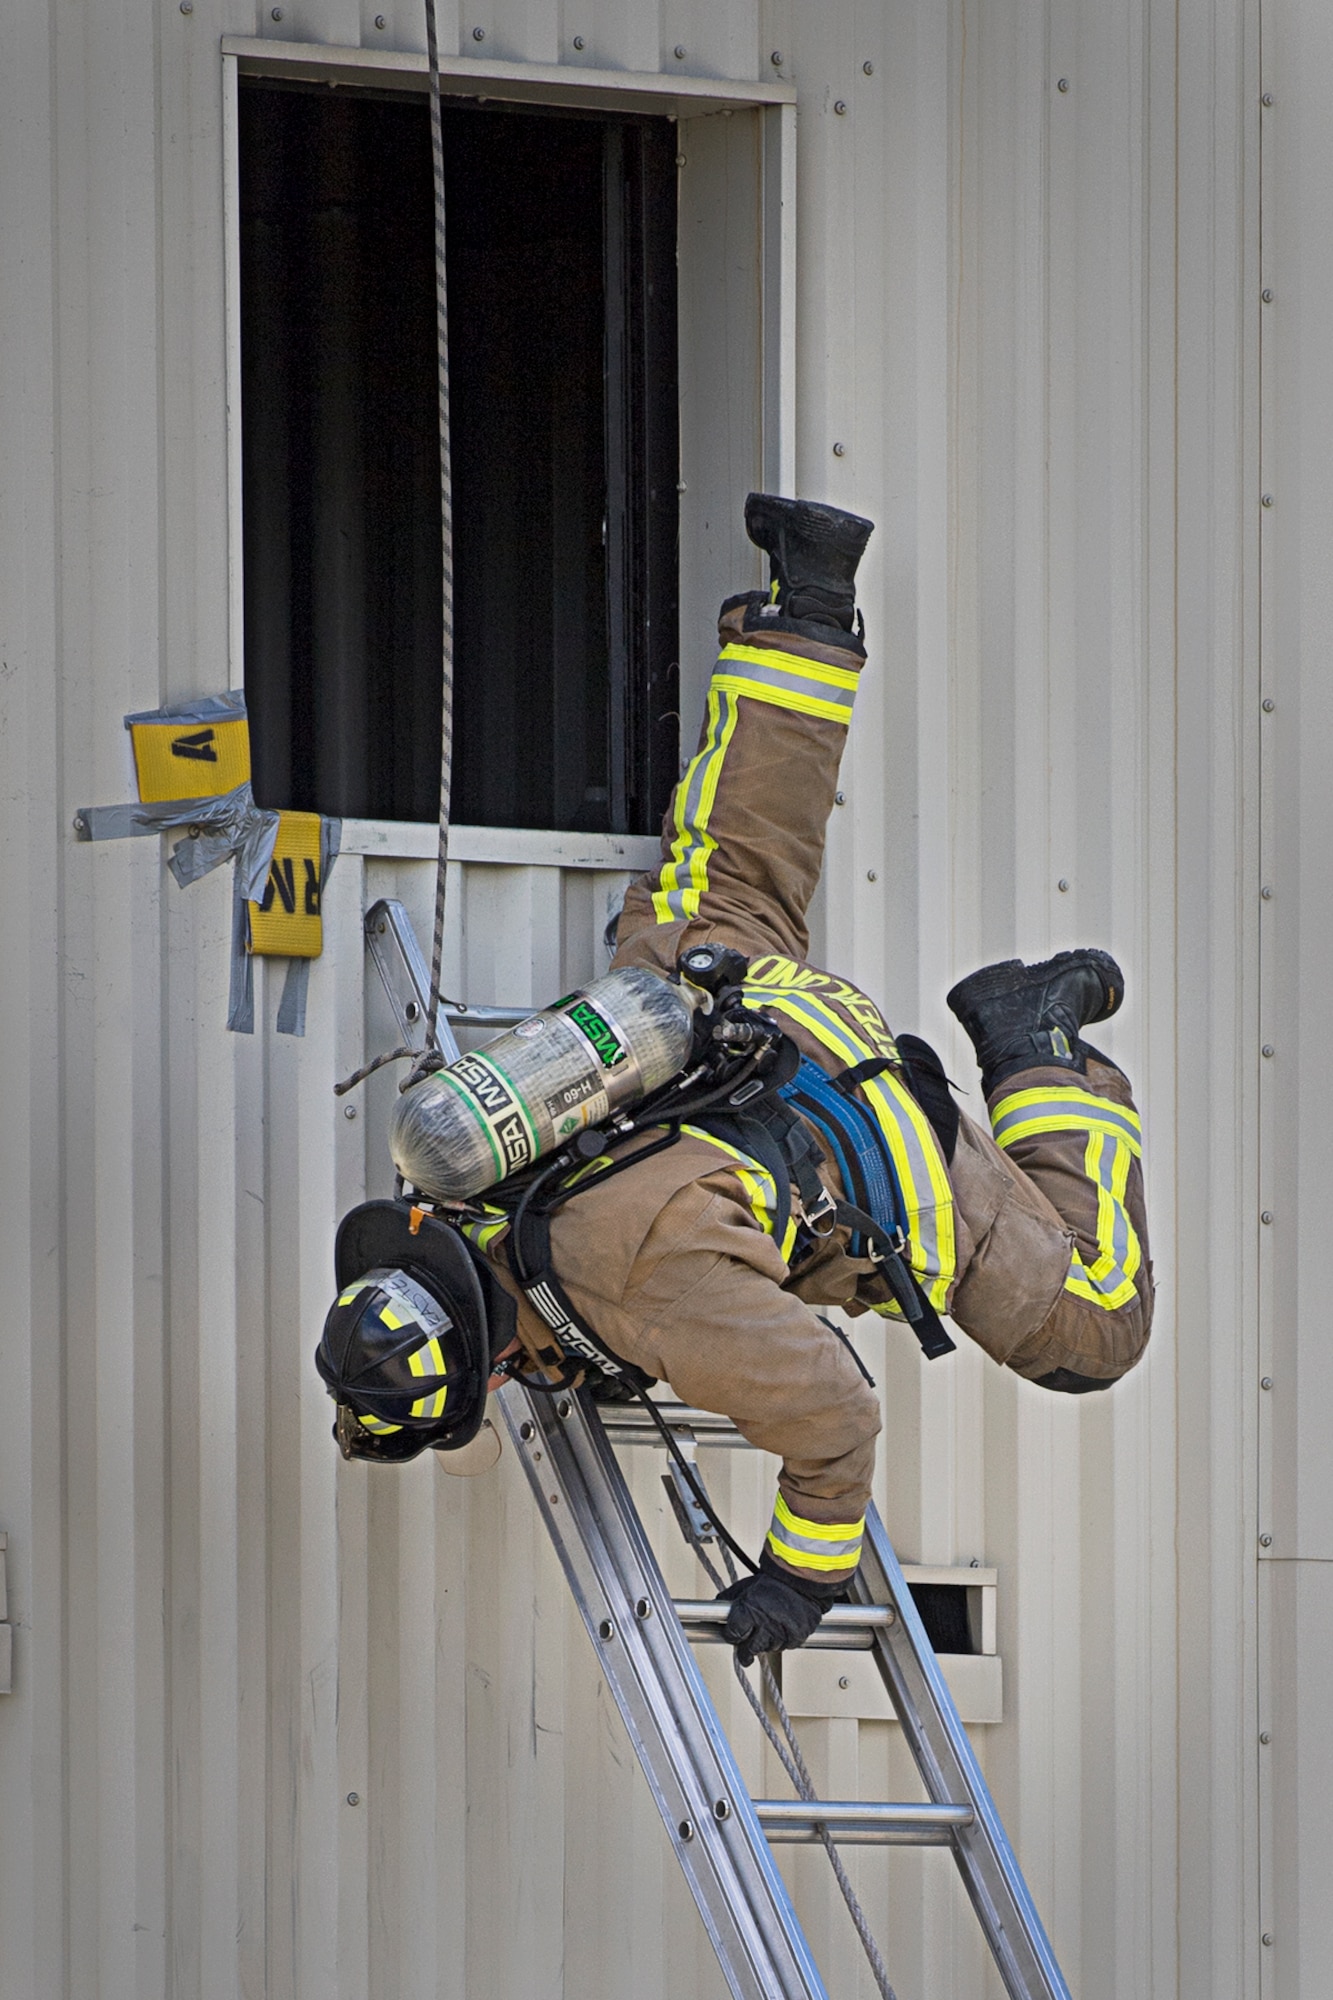 Jordan Easterlund, a firefighter from Tinker Air Force Base, Okla., spins around as he egresses a second story window head first May 11, 2021 at Grissom ARB, Indiana. Firefighters from six locations gathered here to train in firefighting rescue and survival tactics May 10-14. (Air Force photo by Douglas Hays)